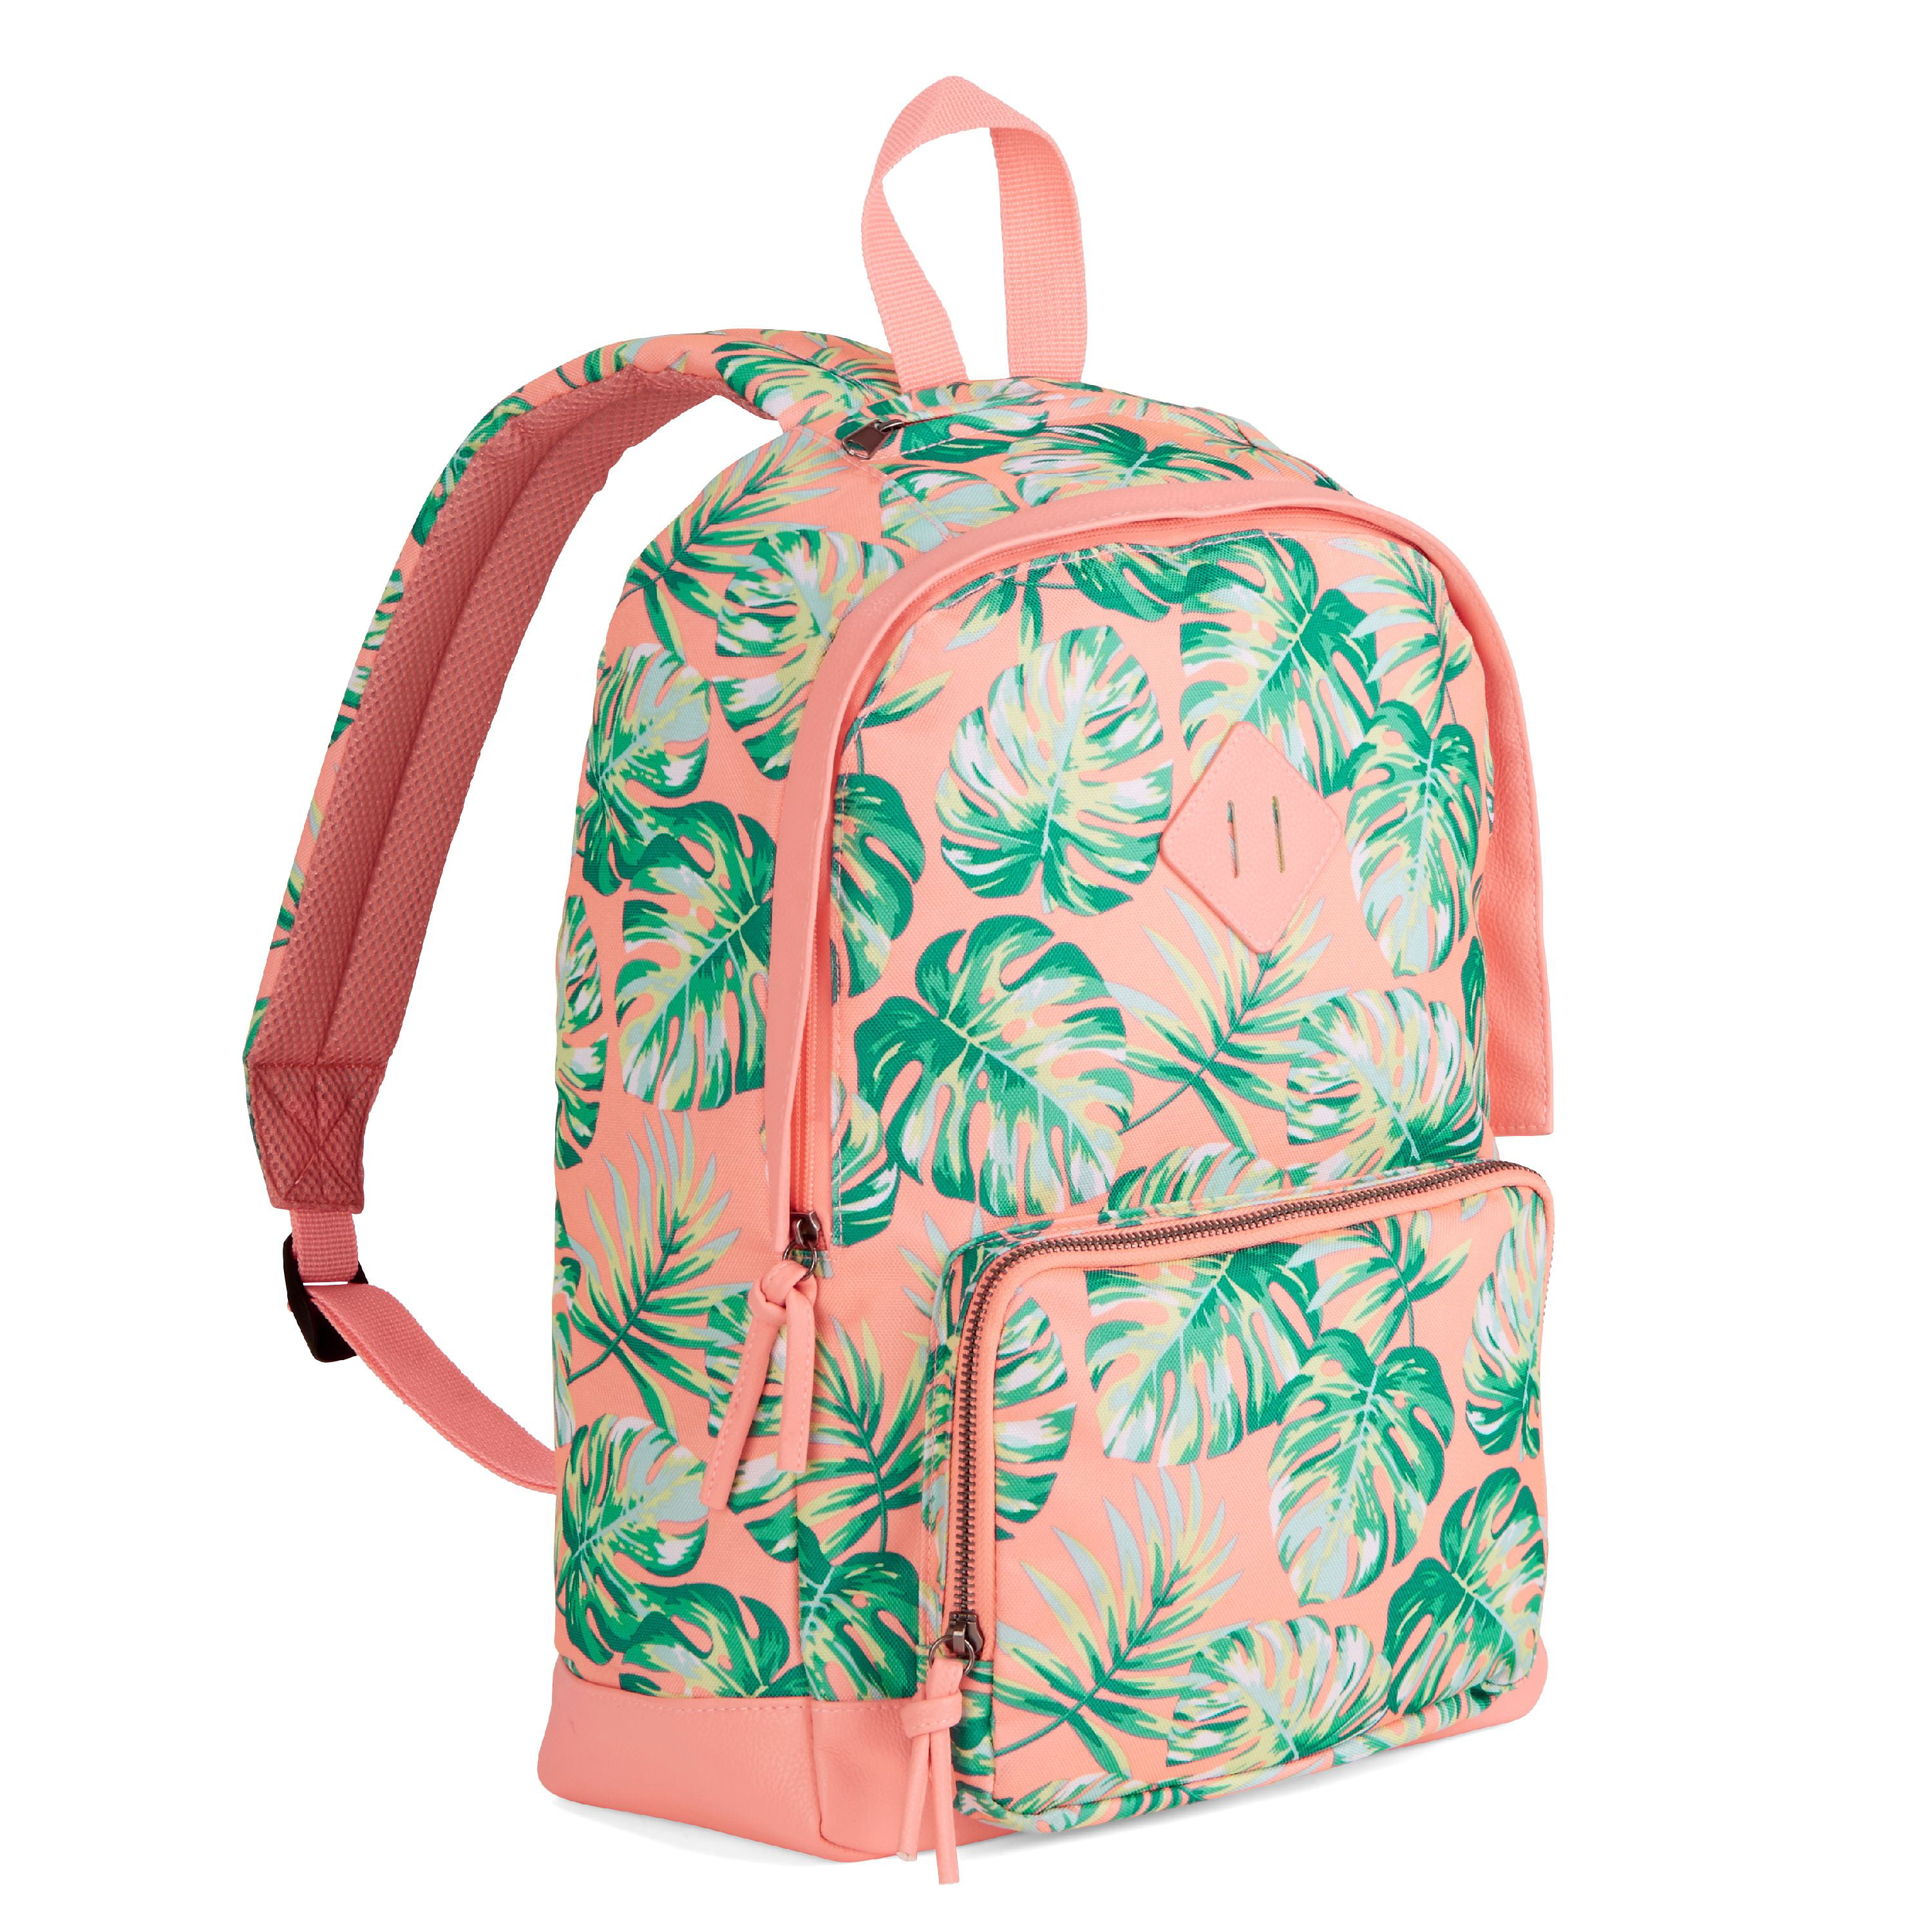 Woman Backpack Topical Eaves And Flowers Shoulder Bag Daypack for Girls School Bag